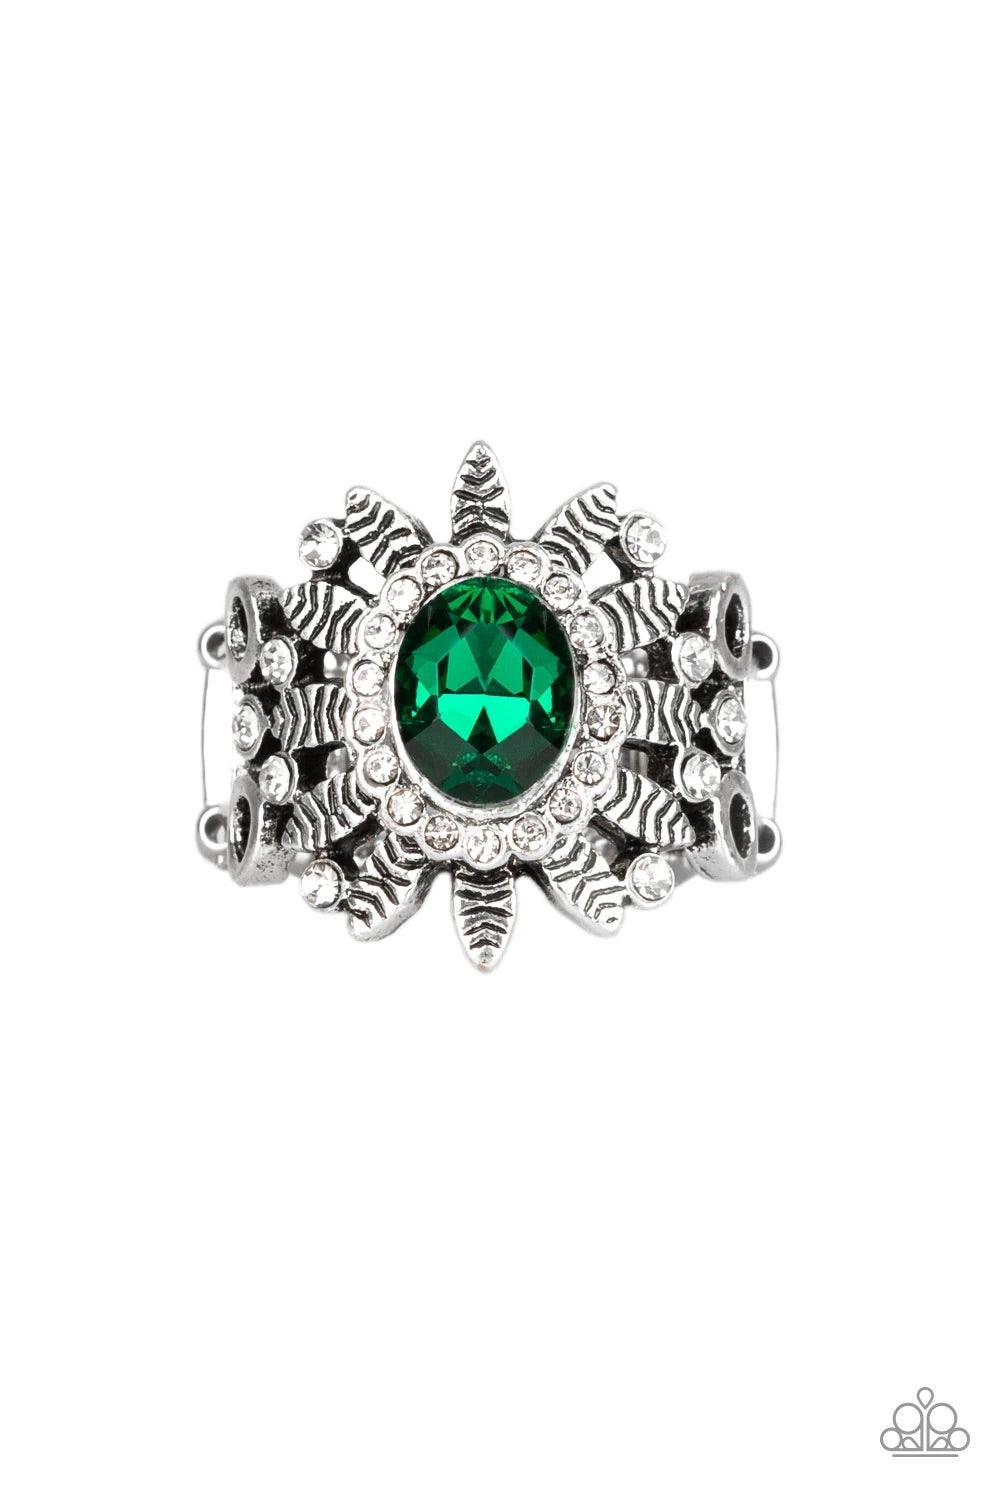 Paparazzi Accessories Burn Bright - Green Ringed in glittery white rhinestones, a sparkling green gem is pressed into the center of a leafy silver frame. Dainty white rhinestones are sprinkled along the shimmery foliage for a refined finish. Features a st